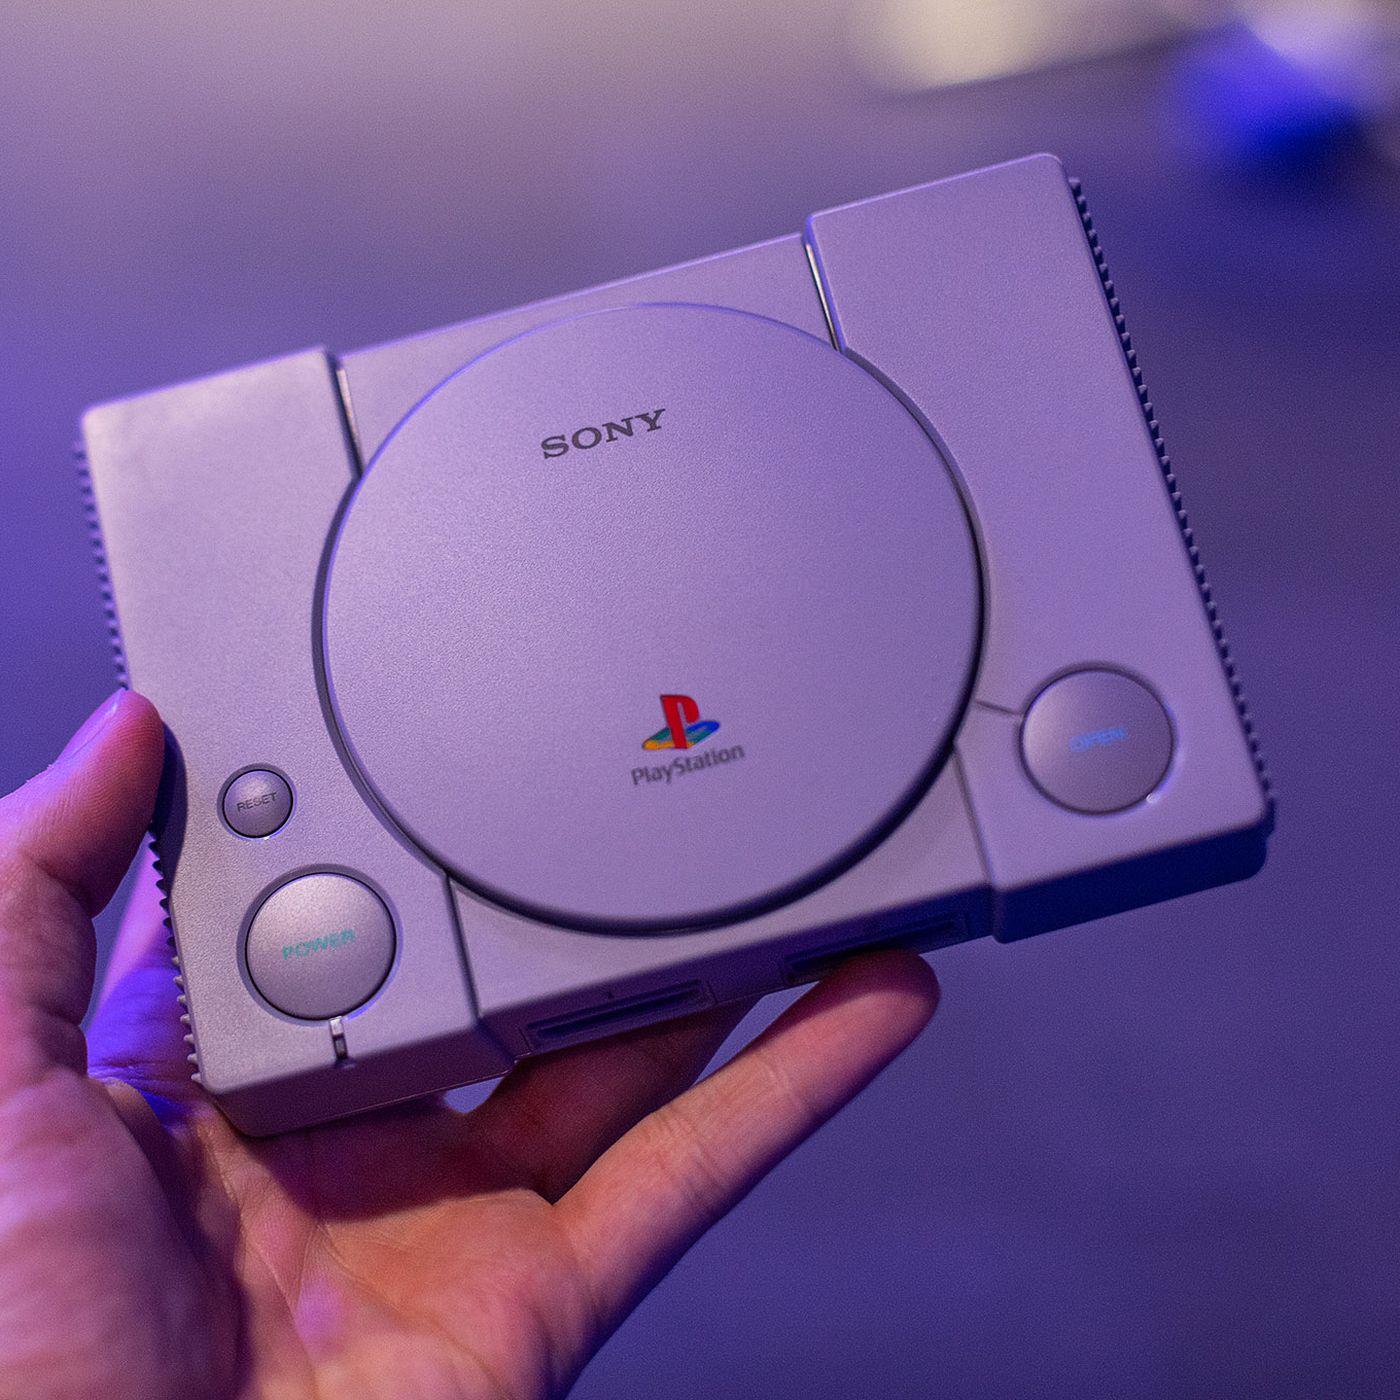 Sony's PlayStation Classic is as simple and fun as you'd expect